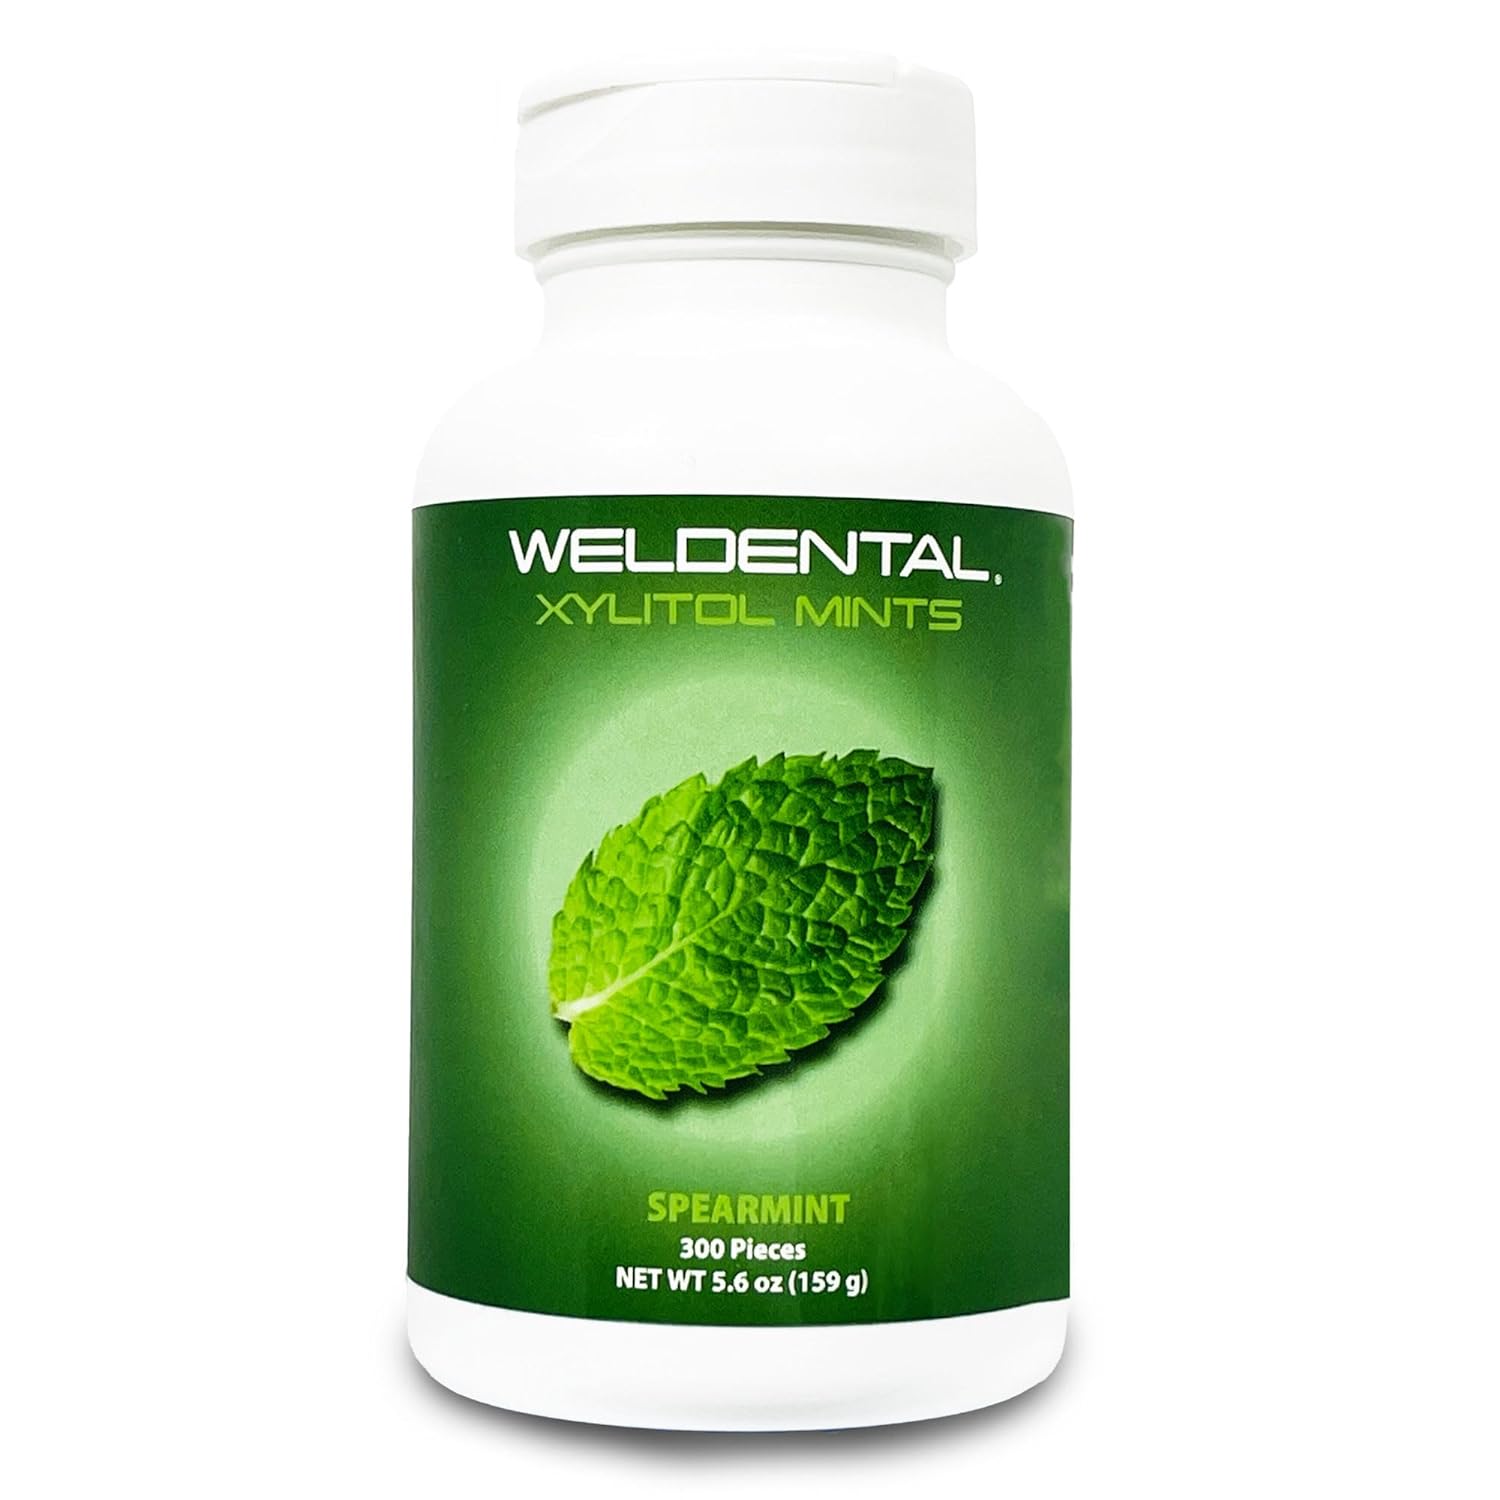 Weldental Xylitol Mints 300 Tablets, Spearmint Flavor, Xylitol Increases Saliva Production, Helps Moisten Dry Mouth